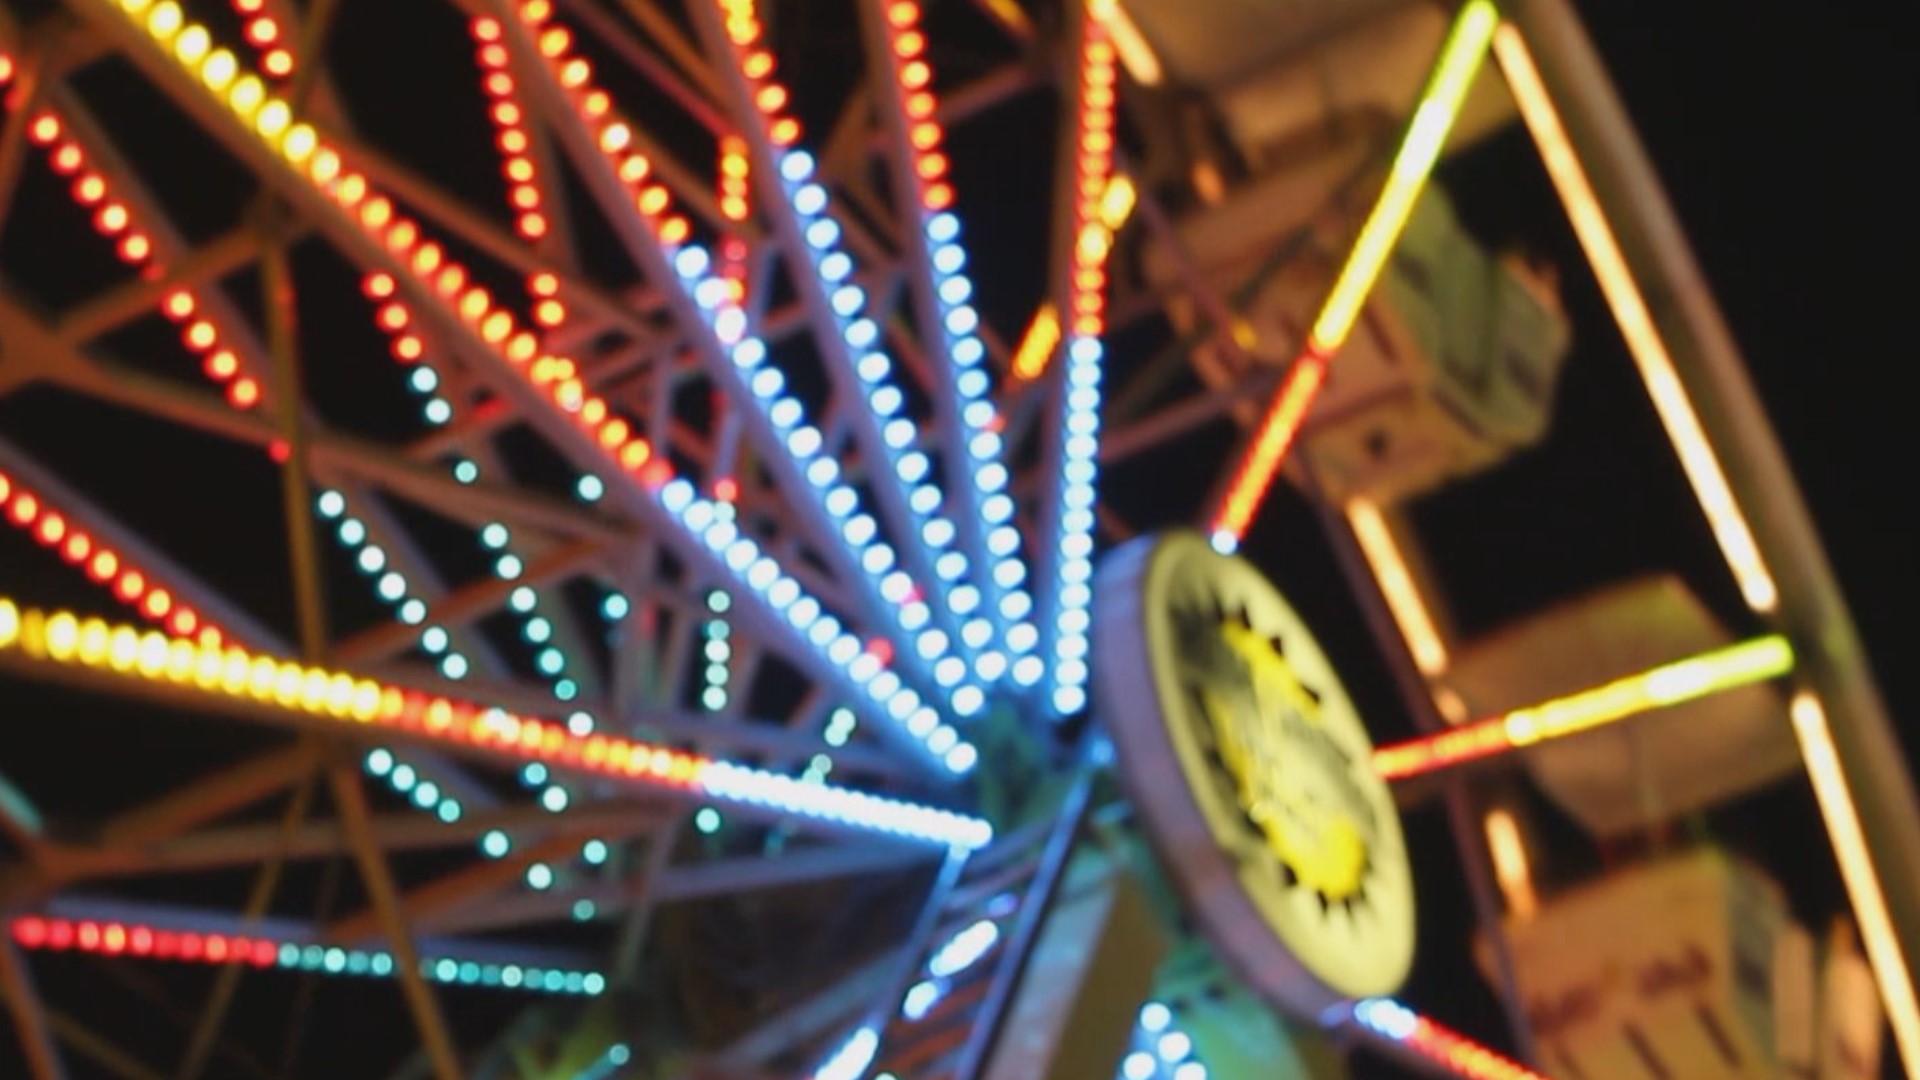 State Fair brings fun and excitement to Fort Smith every year.